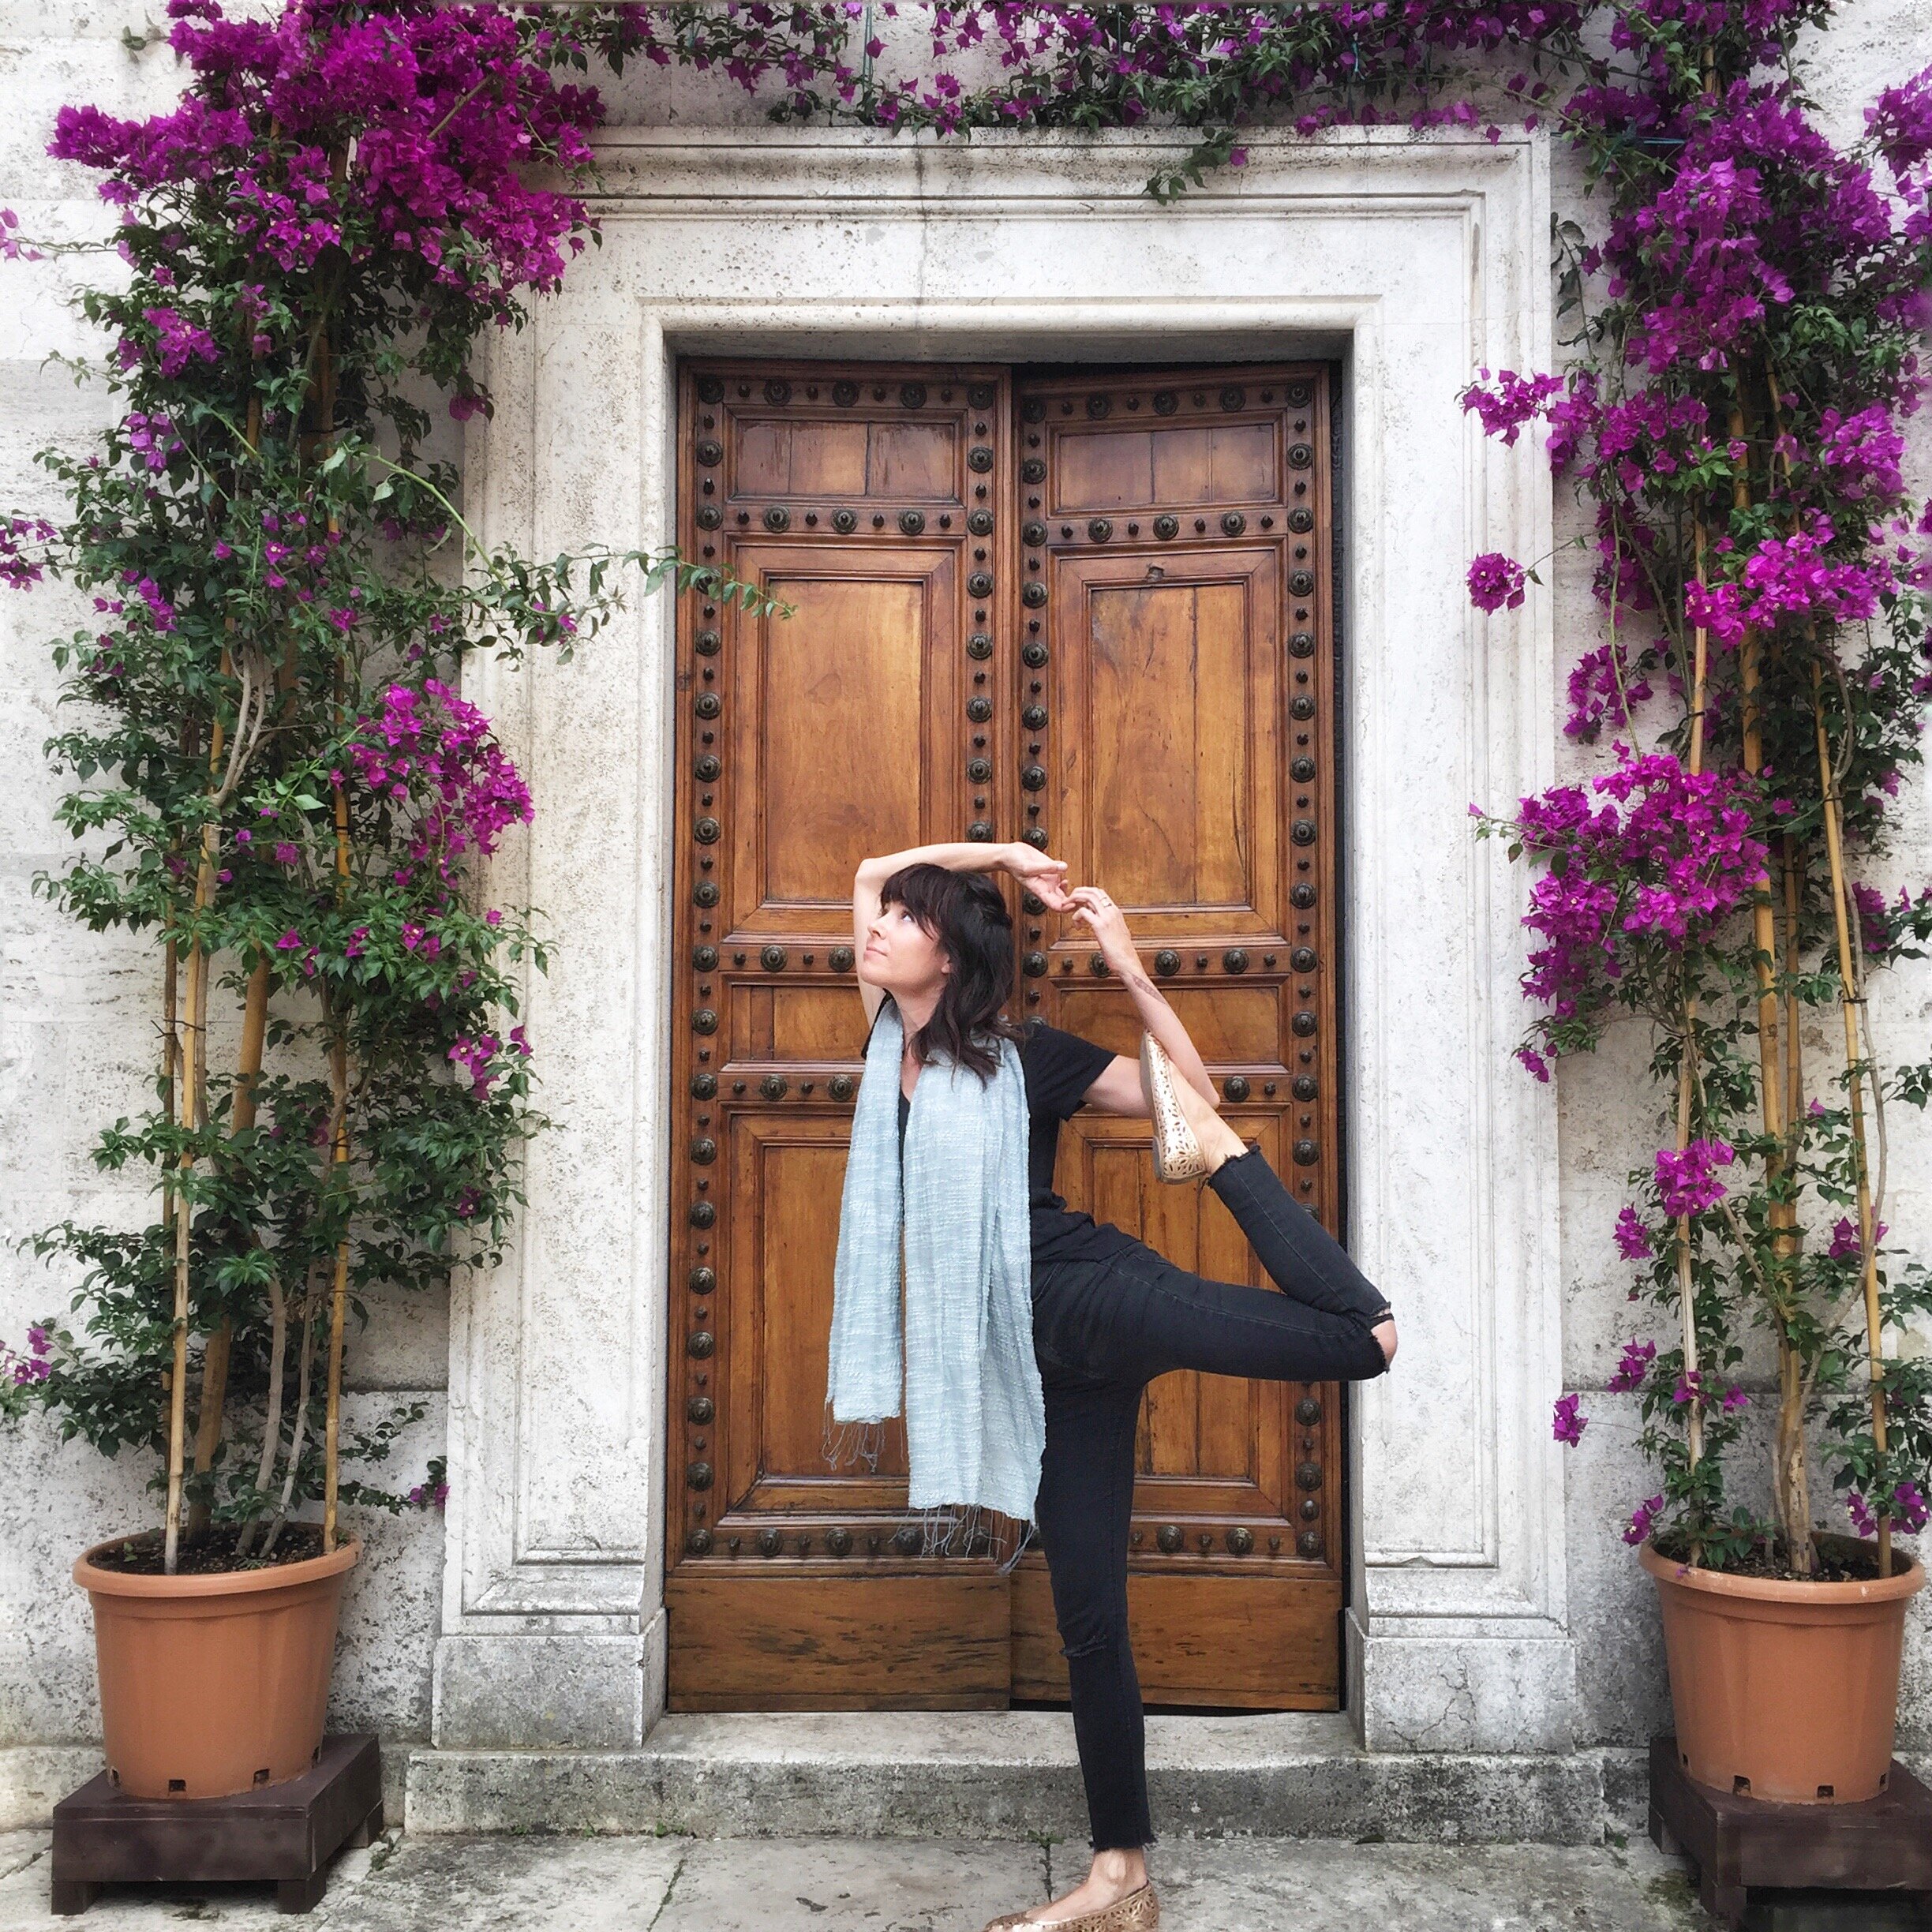 Dancer's pose in the town streets  | EAT.PRAY.MOVE Yoga Retreats | Tuscany, Italy